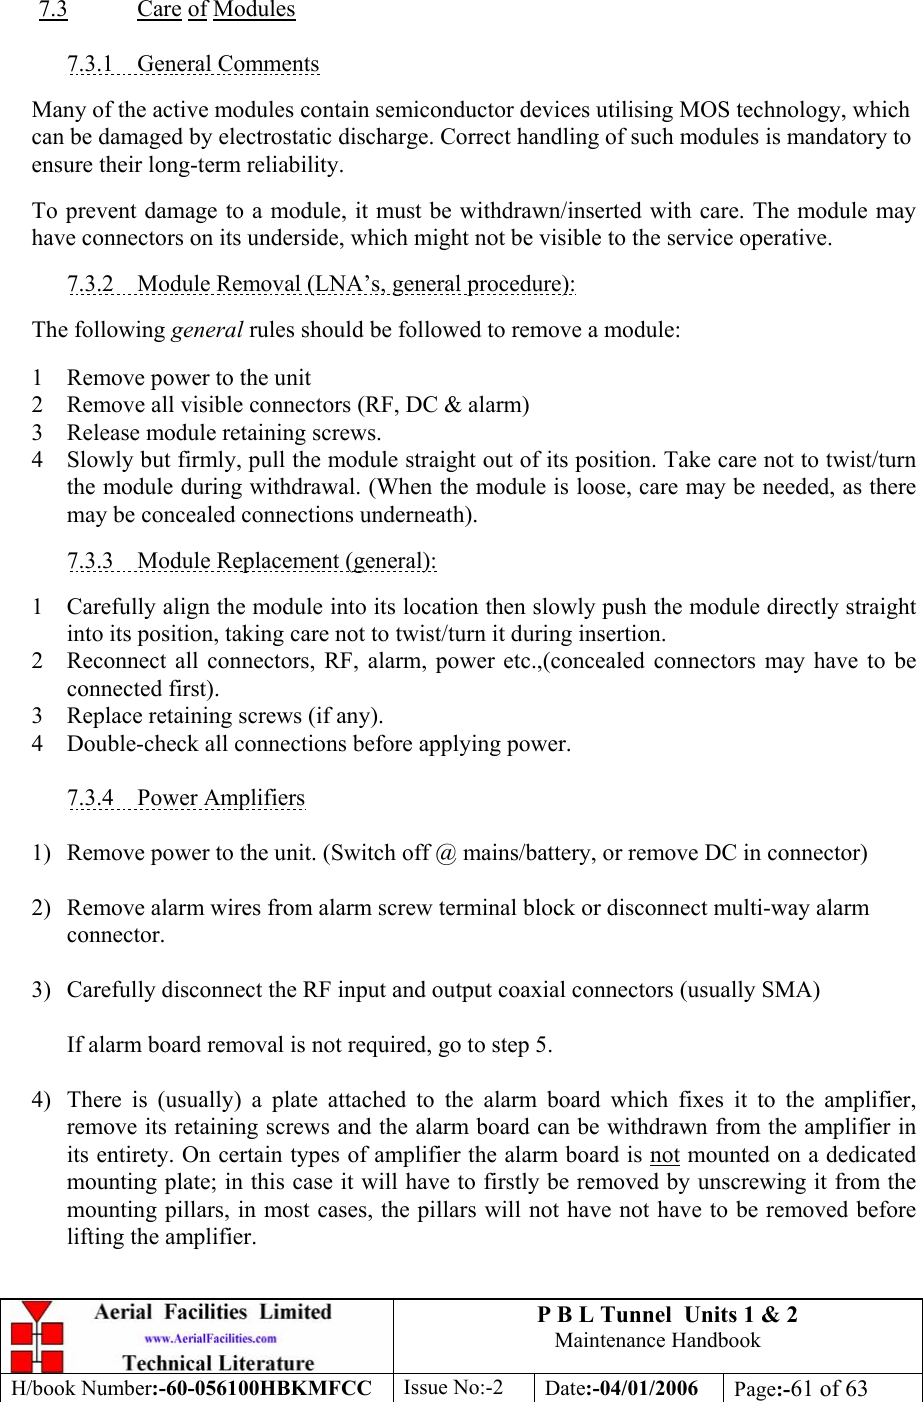 P B L Tunnel  Units 1 &amp; 2 Maintenance Handbook H/book Number:-60-056100HBKMFCC  Issue No:-2  Date:-04/01/2006  Page:-61 of 63   7.3 Care of Modules  7.3.1 General Comments  Many of the active modules contain semiconductor devices utilising MOS technology, which can be damaged by electrostatic discharge. Correct handling of such modules is mandatory to ensure their long-term reliability.  To prevent damage to a module, it must be withdrawn/inserted with care. The module may have connectors on its underside, which might not be visible to the service operative.  7.3.2  Module Removal (LNA’s, general procedure):  The following general rules should be followed to remove a module:  1  Remove power to the unit 2  Remove all visible connectors (RF, DC &amp; alarm) 3  Release module retaining screws. 4  Slowly but firmly, pull the module straight out of its position. Take care not to twist/turn the module during withdrawal. (When the module is loose, care may be needed, as there may be concealed connections underneath).  7.3.3  Module Replacement (general):  1  Carefully align the module into its location then slowly push the module directly straight into its position, taking care not to twist/turn it during insertion. 2  Reconnect all connectors, RF, alarm, power etc.,(concealed connectors may have to be connected first). 3 Replace retaining screws (if any). 4  Double-check all connections before applying power.  7.3.4 Power Amplifiers  1)  Remove power to the unit. (Switch off @ mains/battery, or remove DC in connector)  2)  Remove alarm wires from alarm screw terminal block or disconnect multi-way alarm connector.  3)  Carefully disconnect the RF input and output coaxial connectors (usually SMA)  If alarm board removal is not required, go to step 5.  4)  There is (usually) a plate attached to the alarm board which fixes it to the amplifier, remove its retaining screws and the alarm board can be withdrawn from the amplifier in its entirety. On certain types of amplifier the alarm board is not mounted on a dedicated mounting plate; in this case it will have to firstly be removed by unscrewing it from the mounting pillars, in most cases, the pillars will not have not have to be removed before lifting the amplifier.  